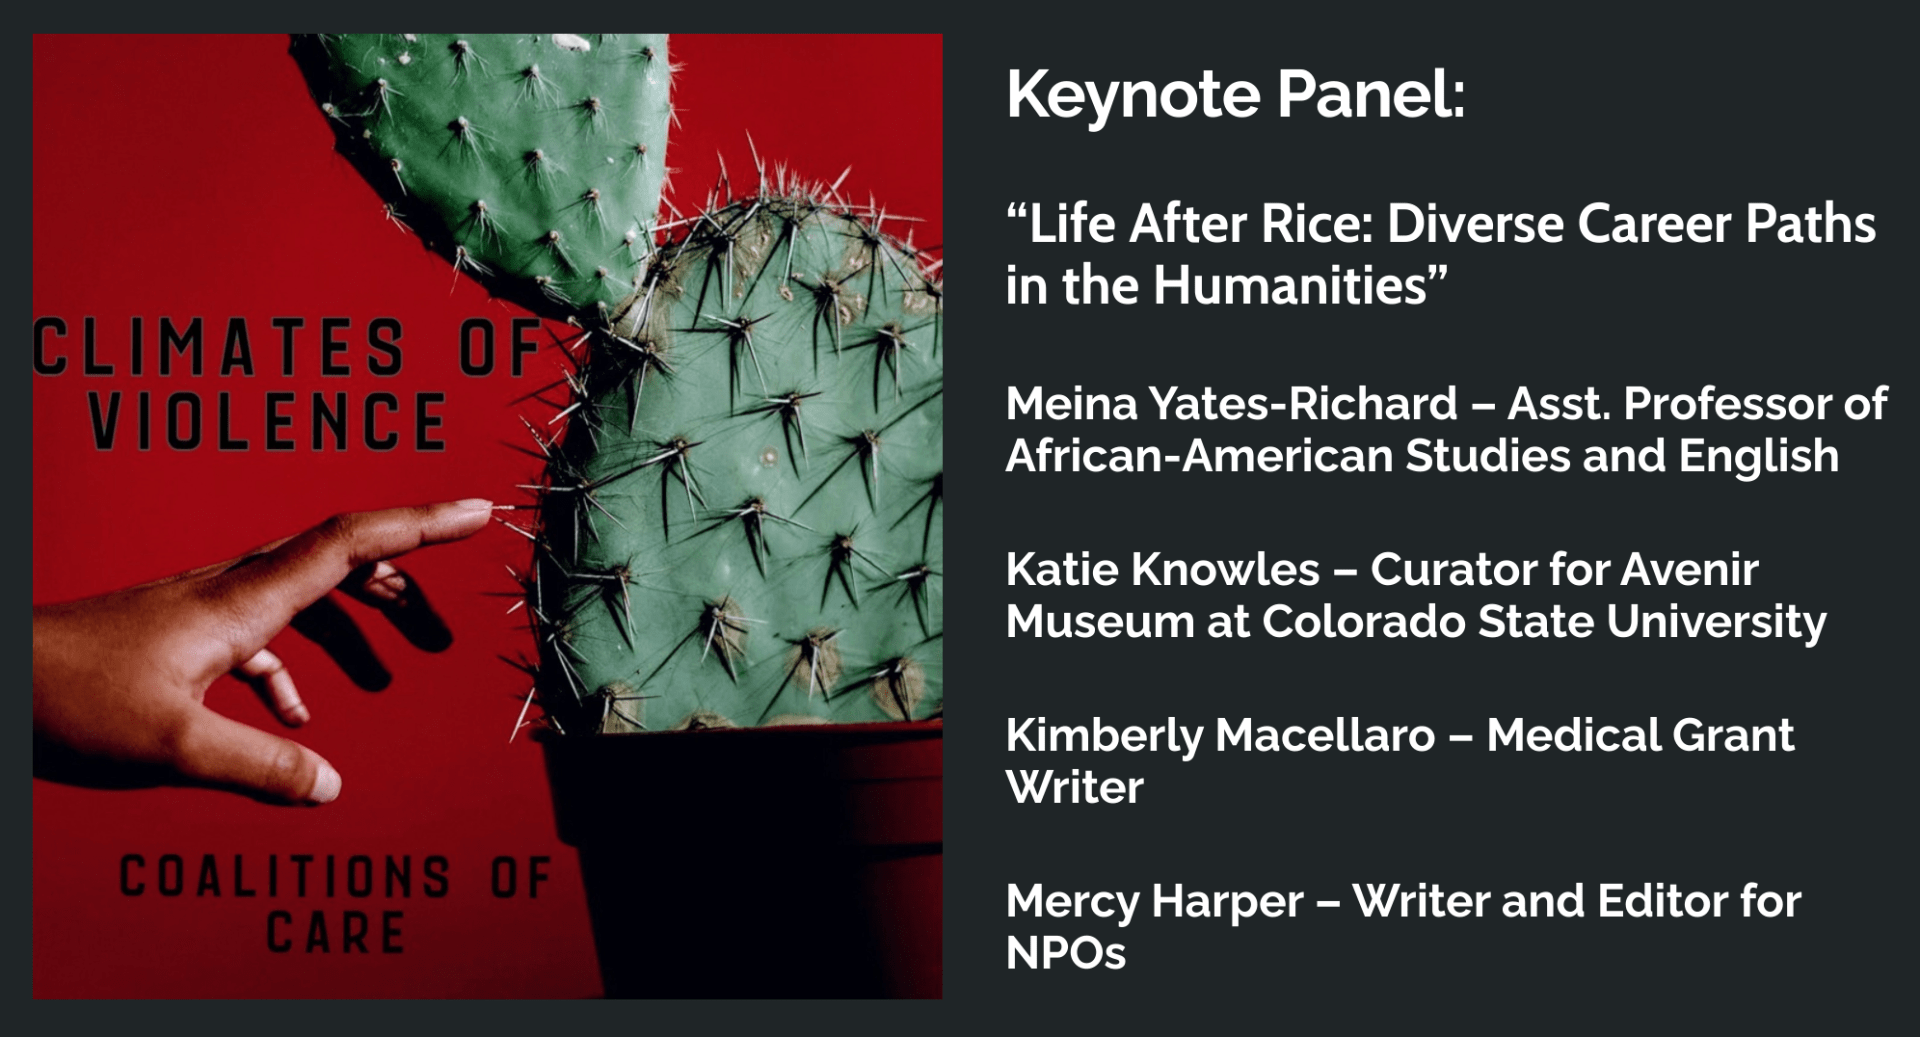 The graduate symposium's keynote panel will feature four Rice/CSWGS alumni.